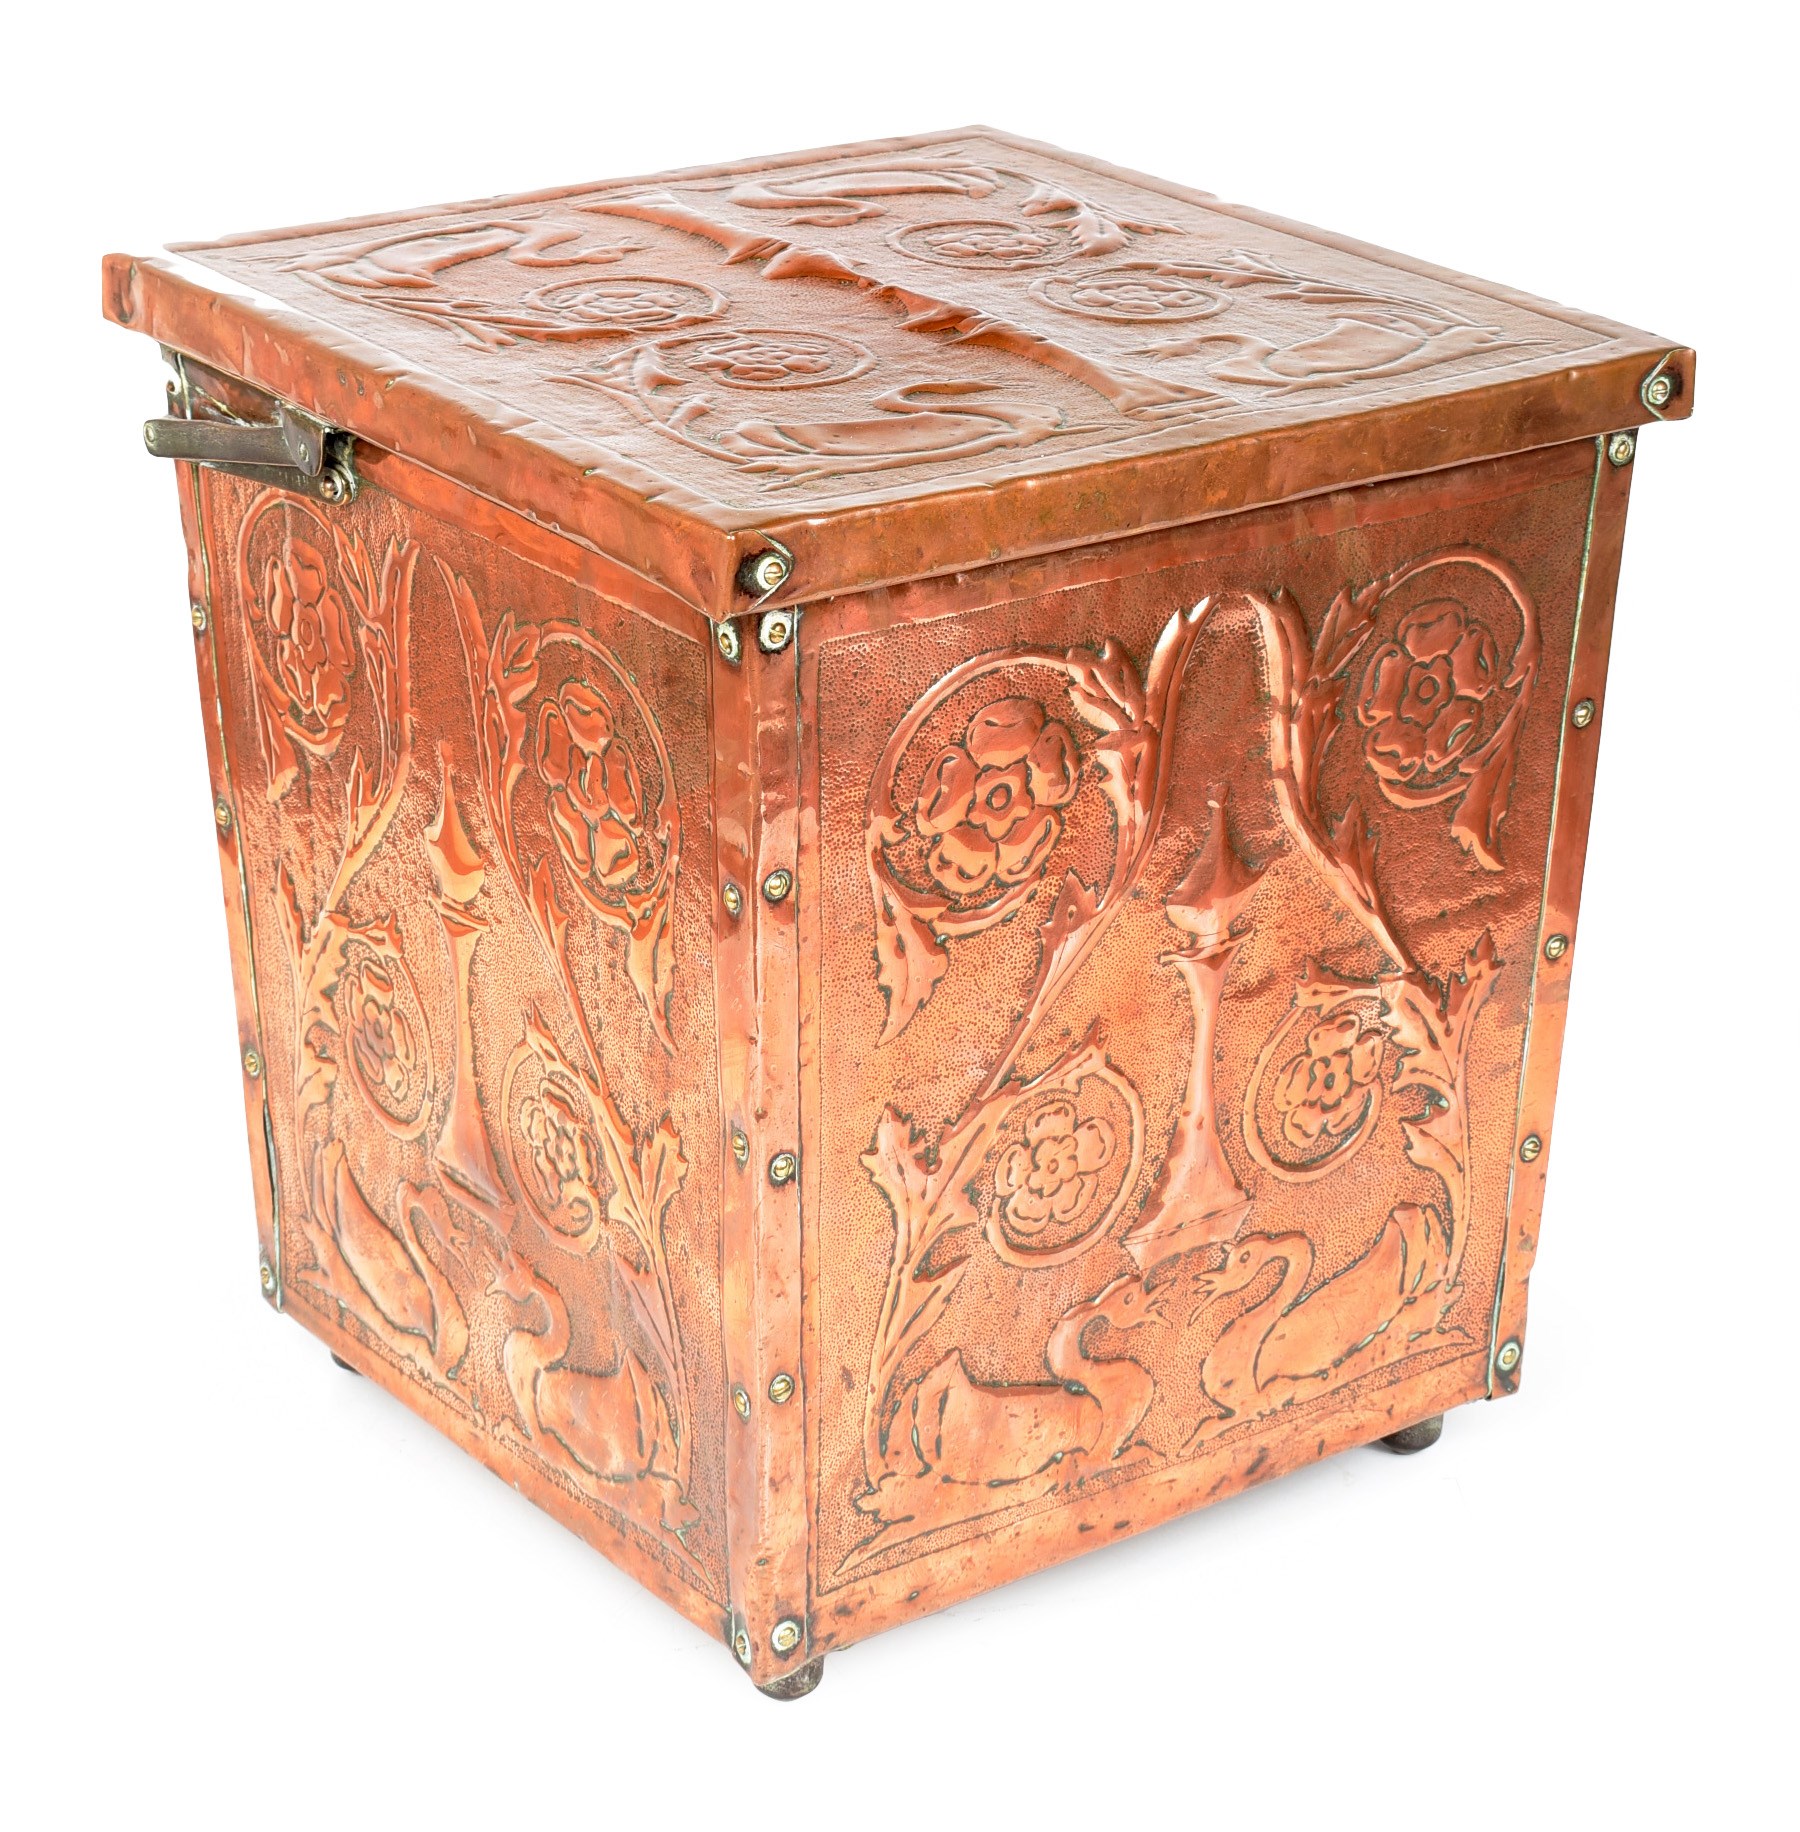 An Arts & Crafts movement copper coal scuttle. Embossed with a design of birds and Tudor roses. With